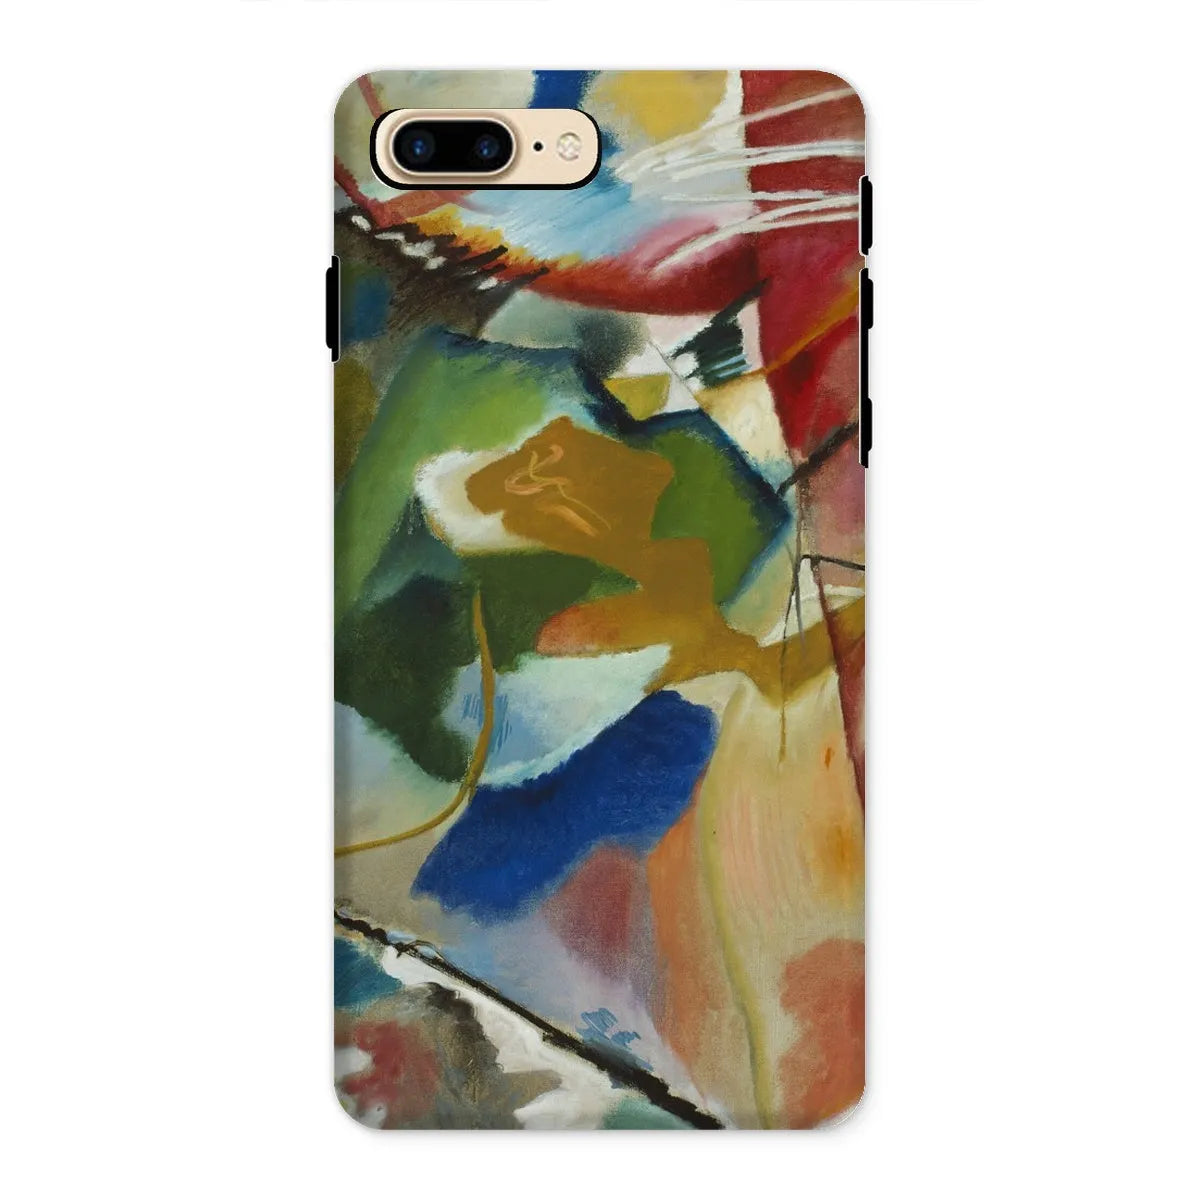 Painting With Green Center Art Phone Case - Wassily Kandinsky - Iphone 8 Plus / Matte - Mobile Phone Cases - Aesthetic